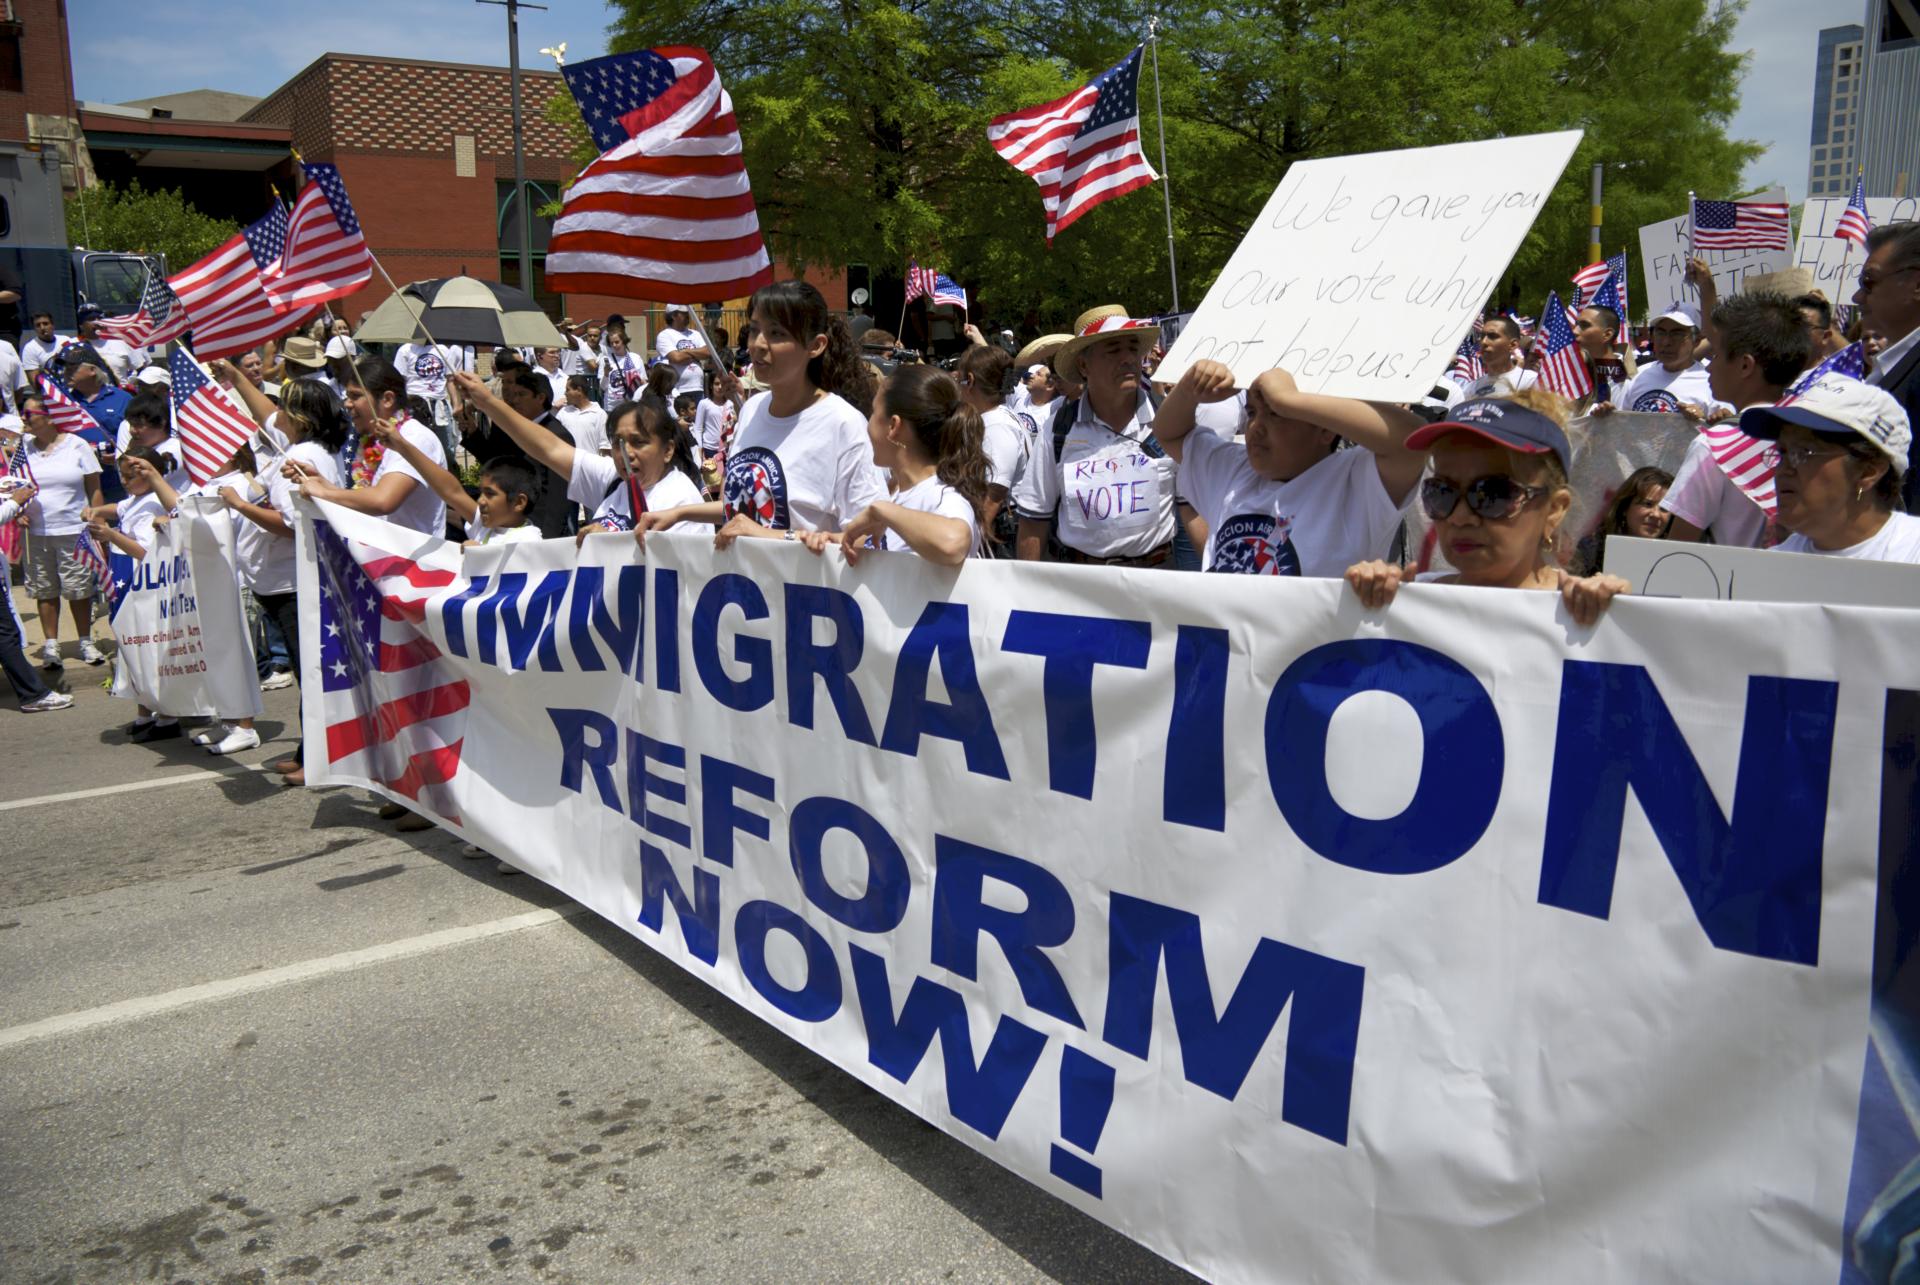 Photo of people holding Immigration Refom Now banner at a rally or protest